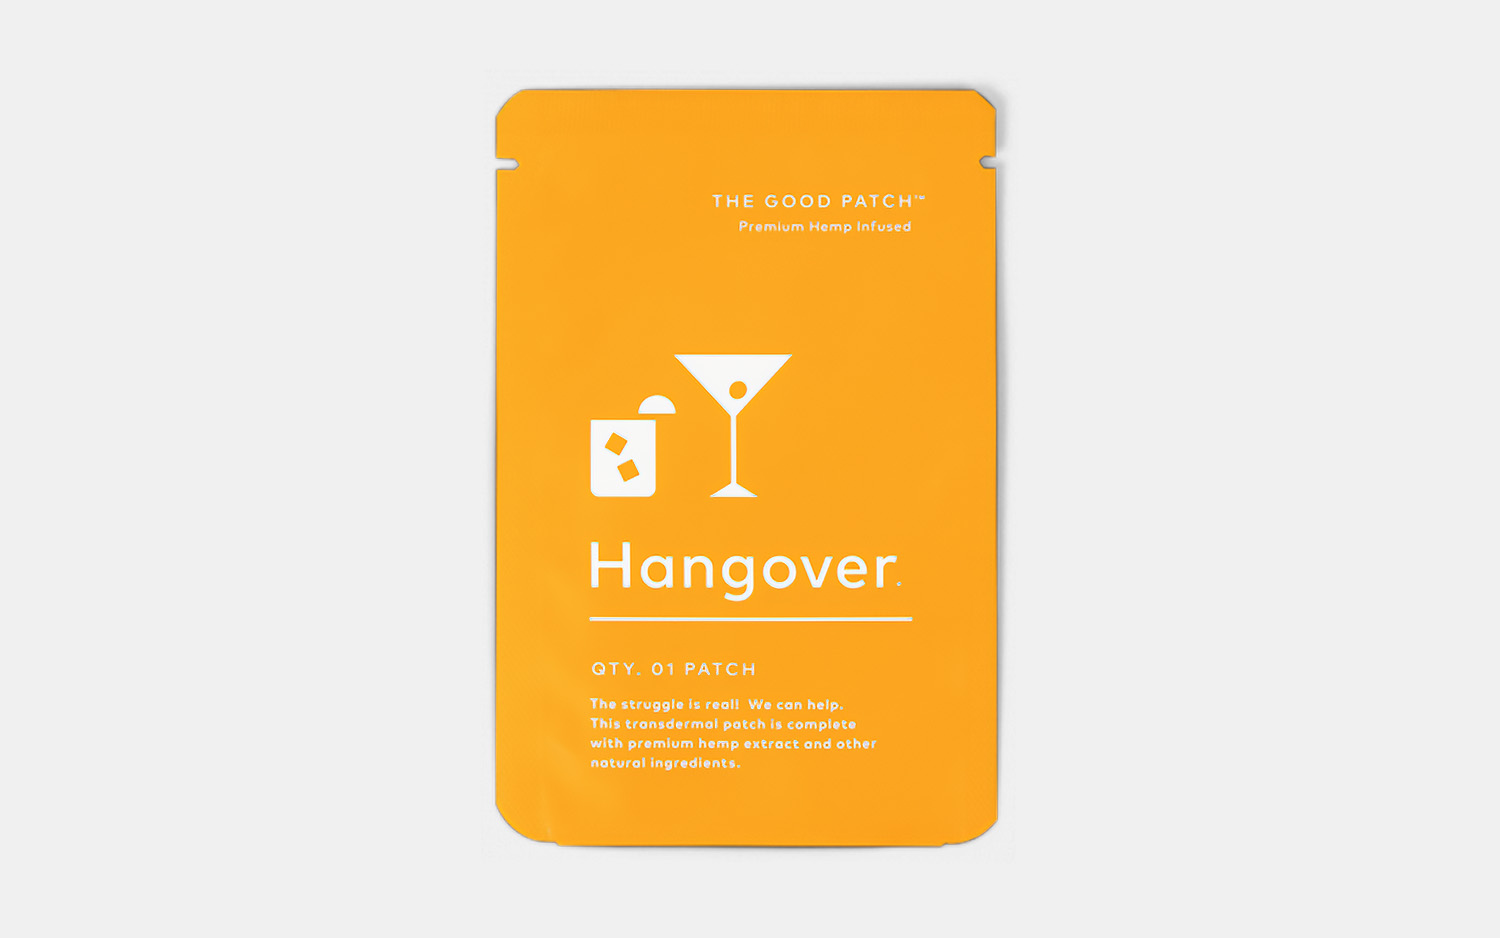 The Good Patch Hangover